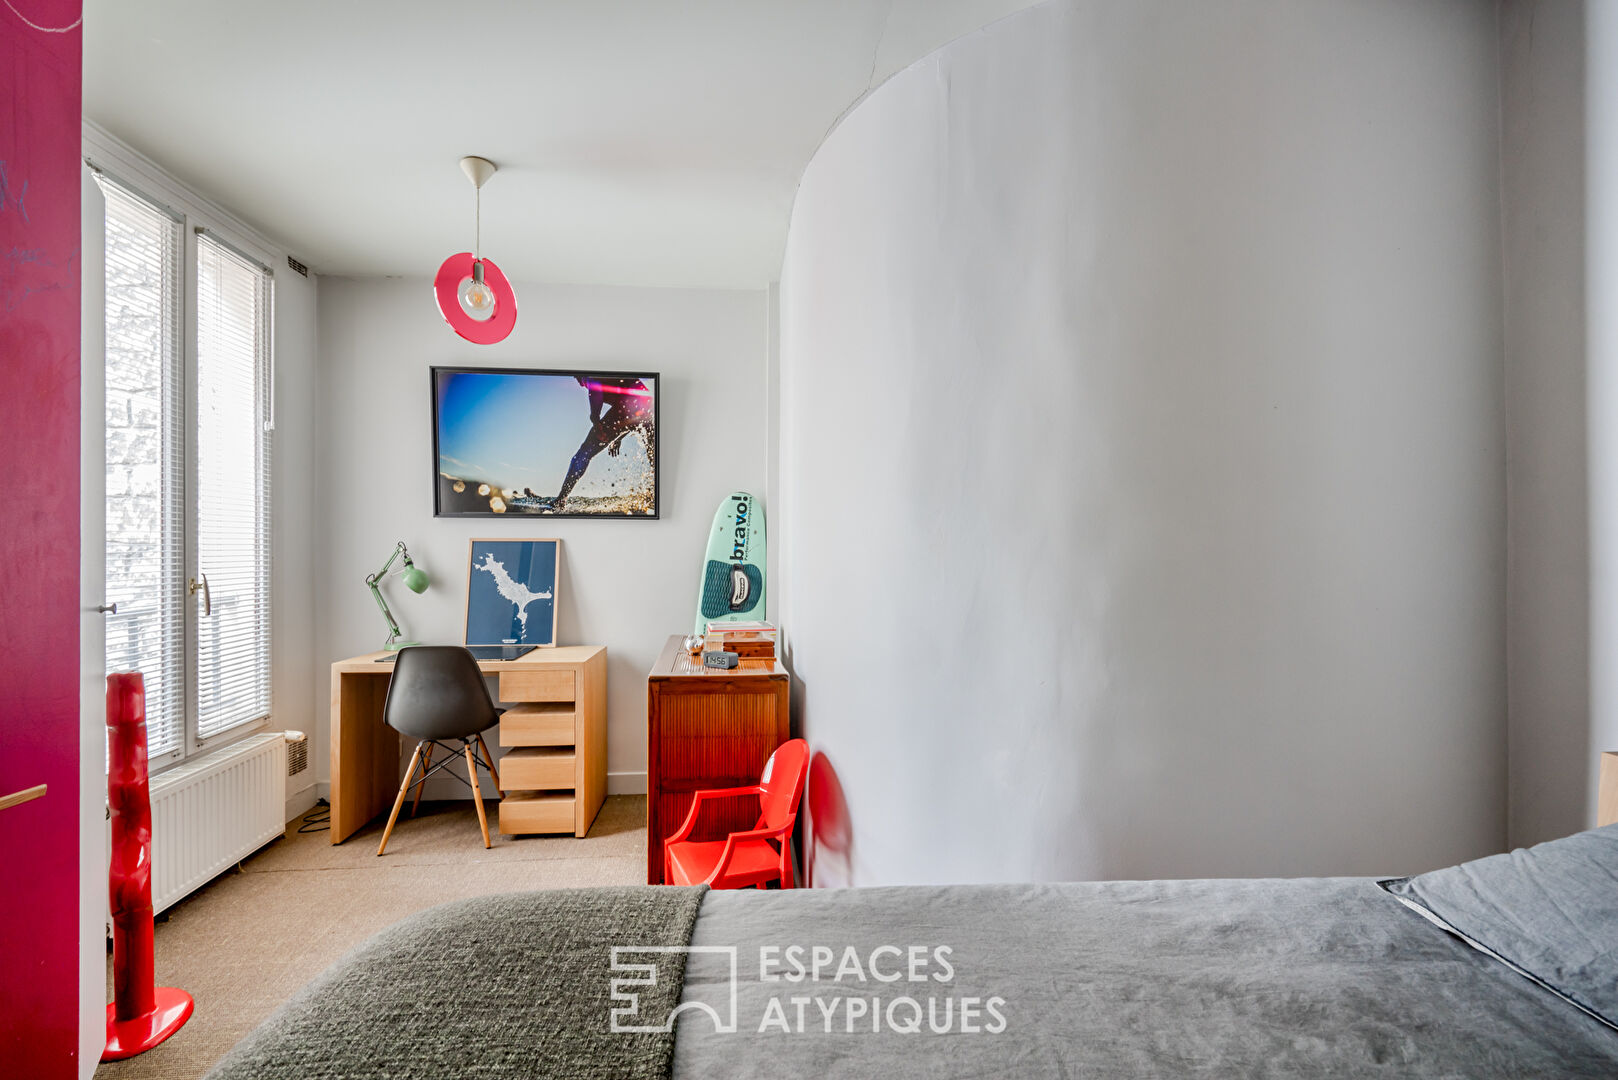 Family triplex with exteriors in Epinettes – Batignolles